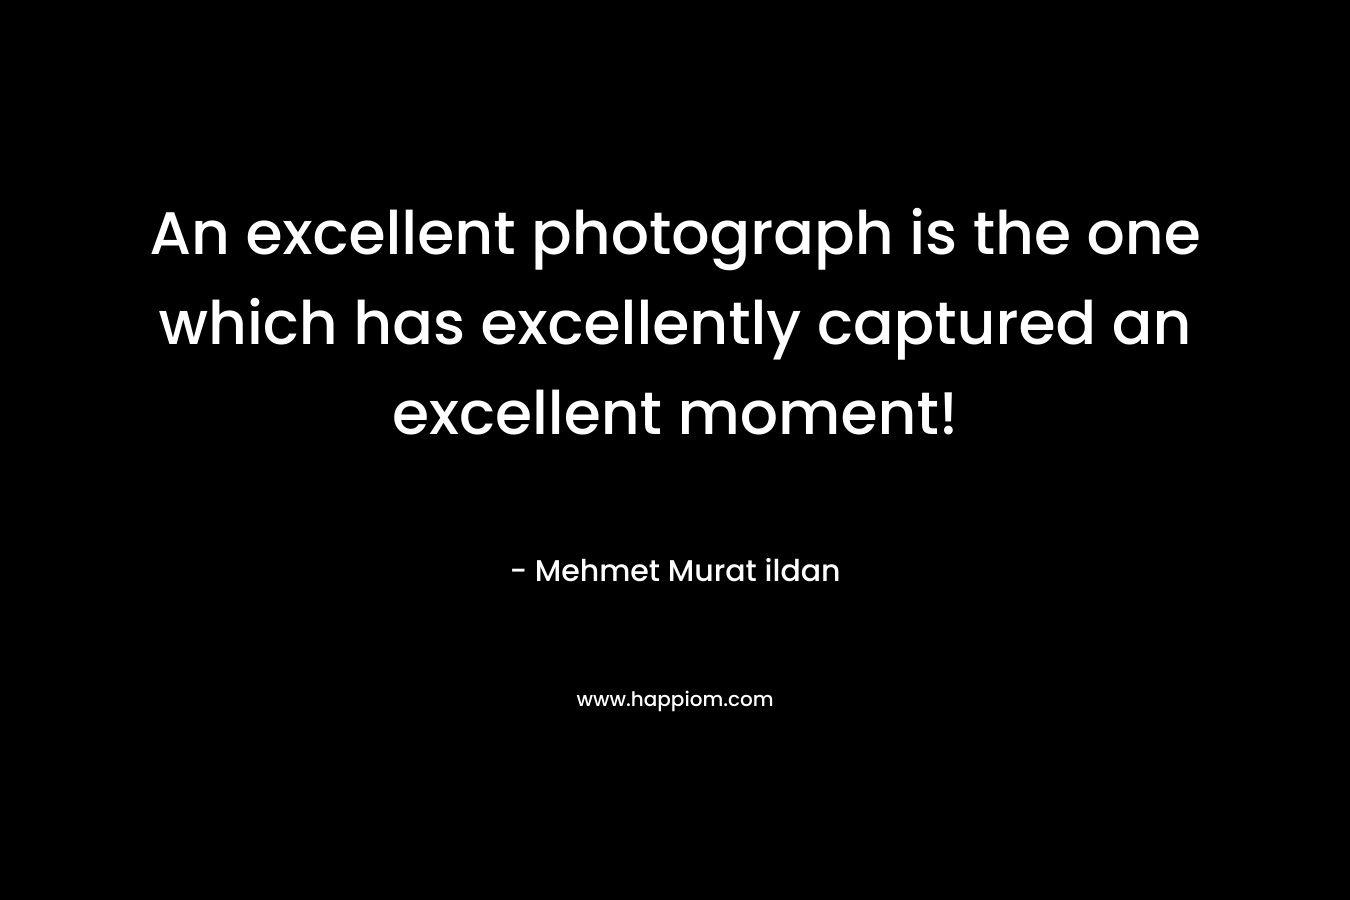 An excellent photograph is the one which has excellently captured an excellent moment!